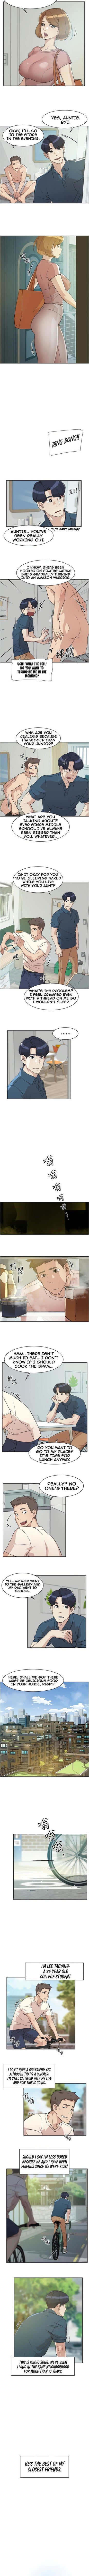 Softcore Everything about Best Friend Manhwa 01-13 Anus - Page 3